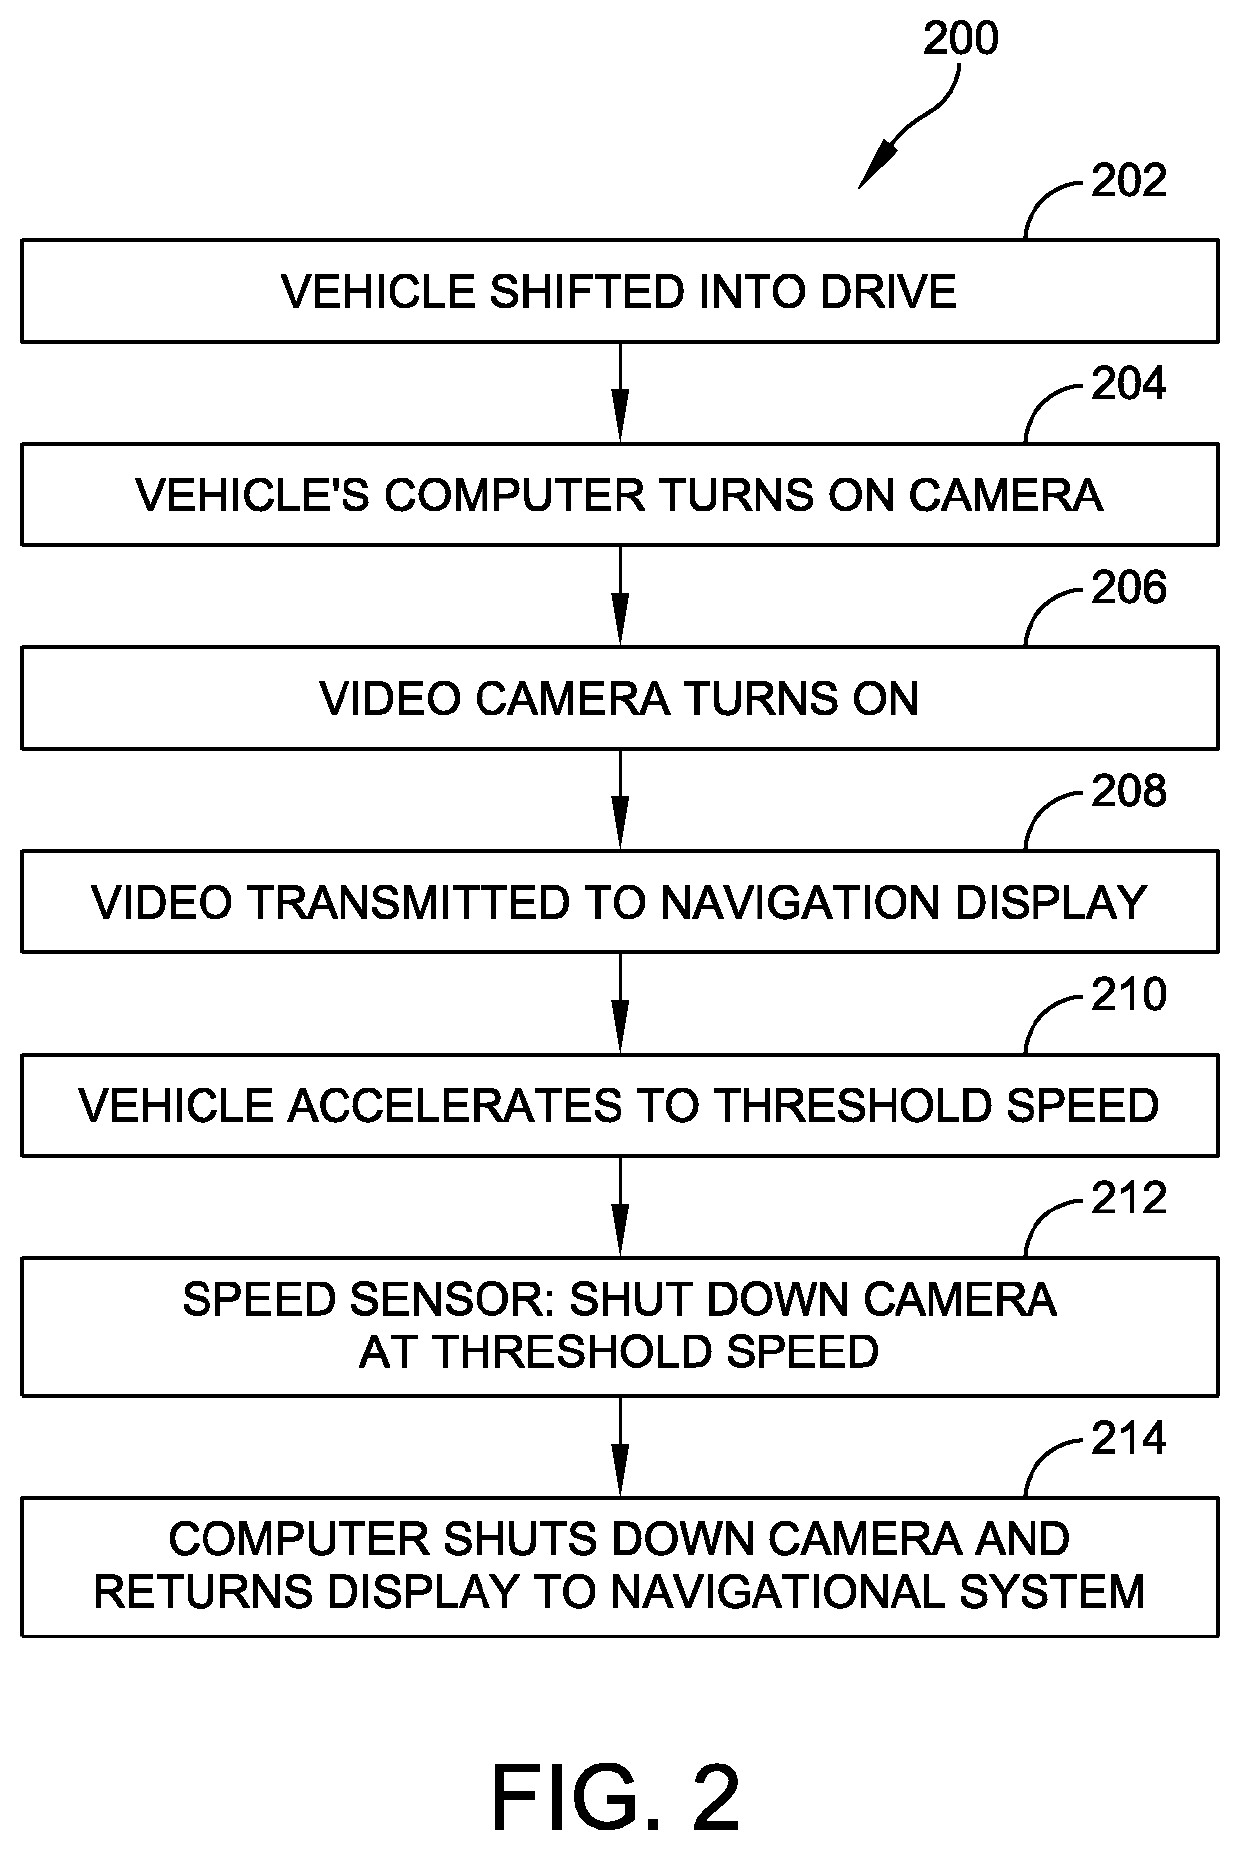 System and method for providing front-oriented visual information to vehicle driver